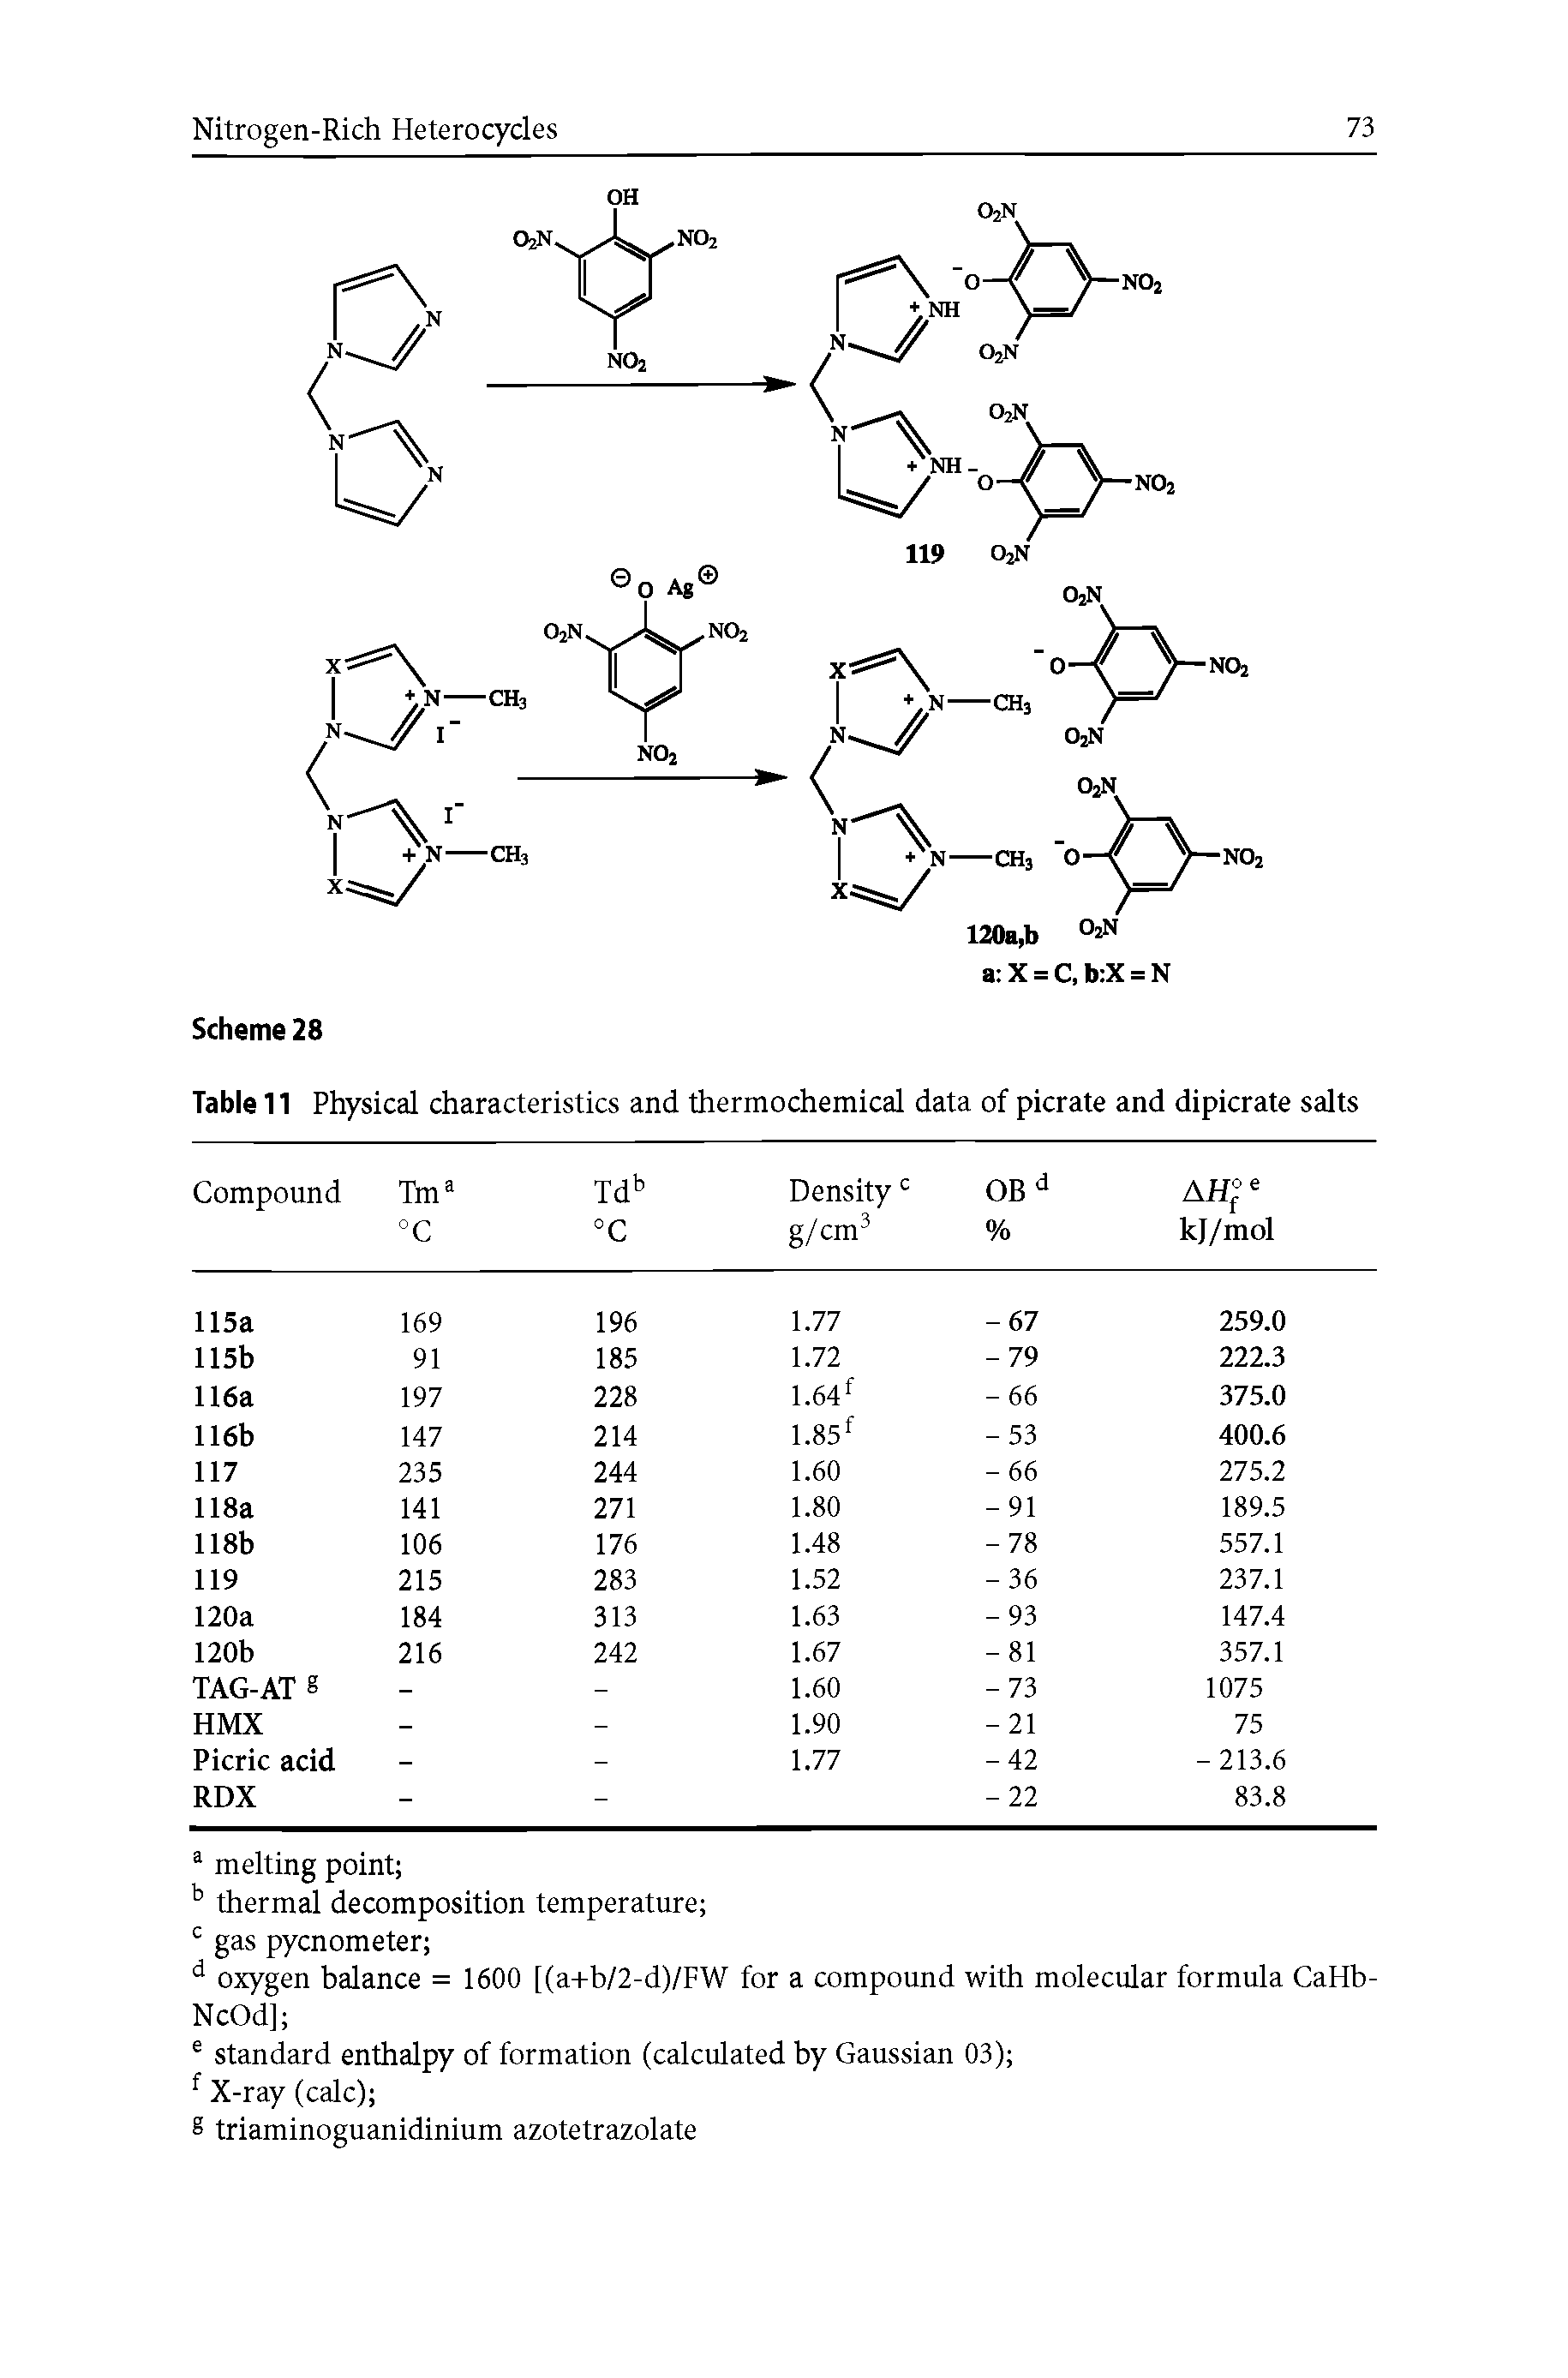 Table 11 Physical characteristics and thermochemical data of picrate and dipicrate salts...